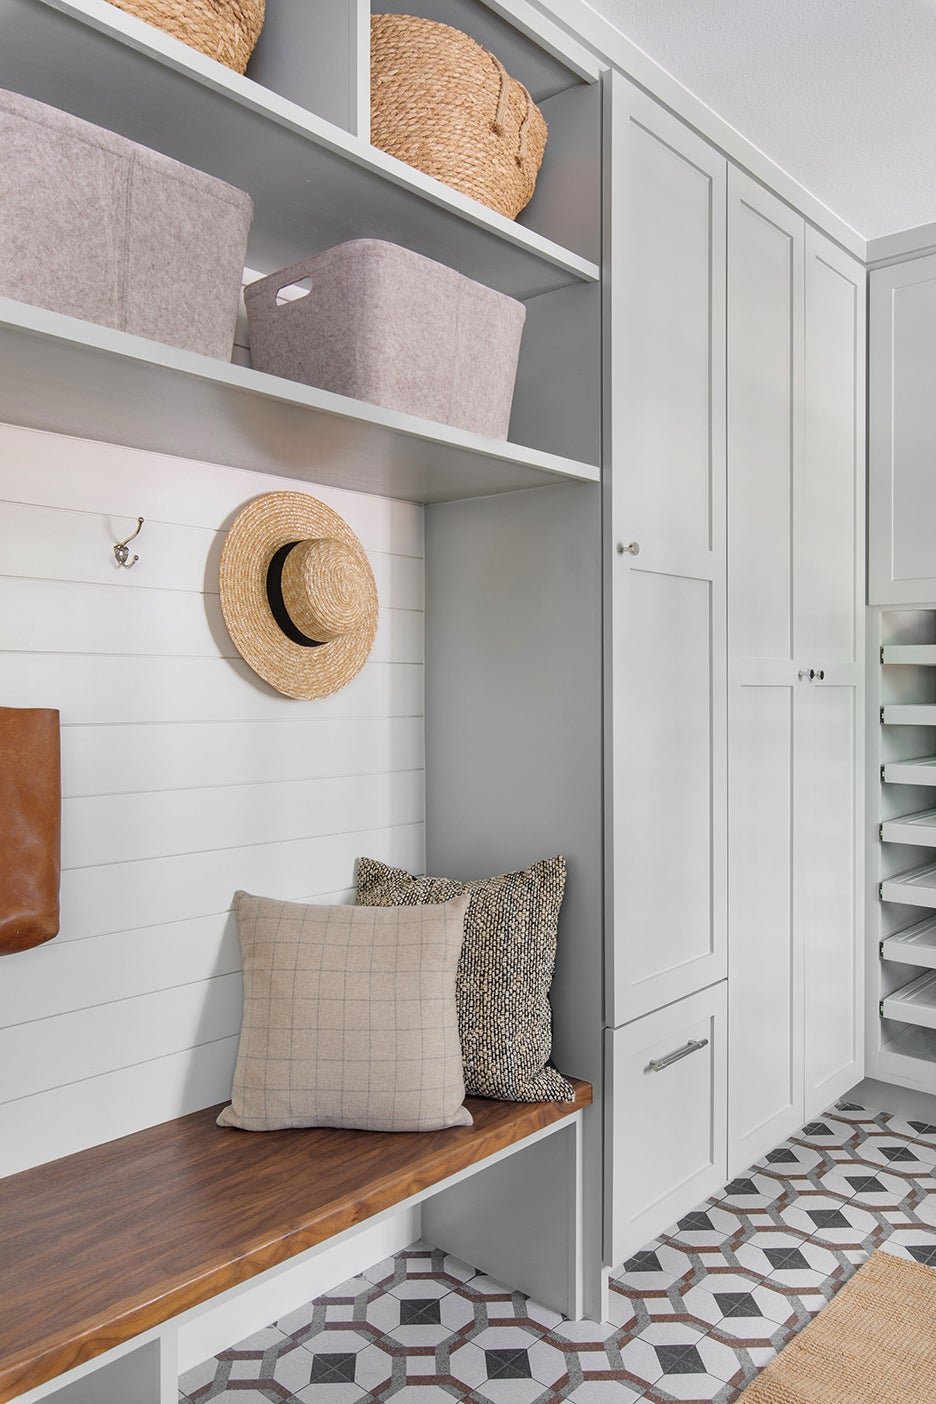 The Clever Drawer System Your Laundry Room Is Missing